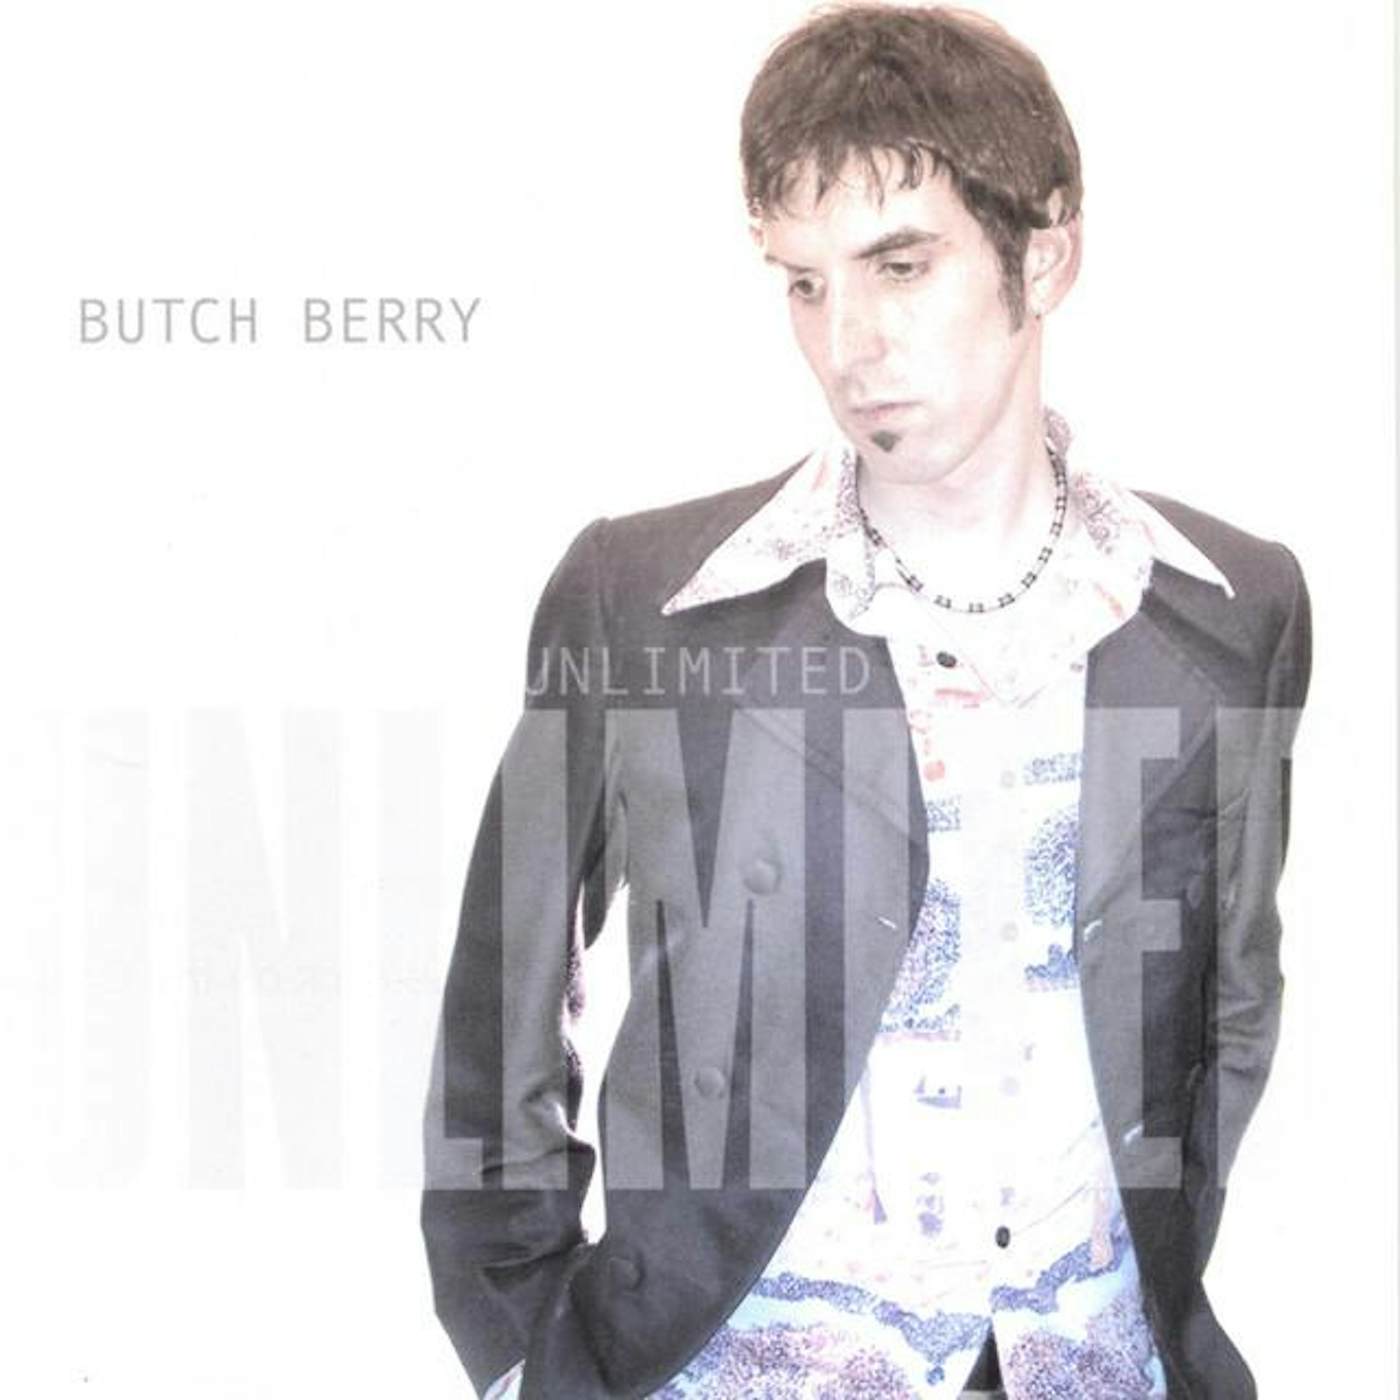 Butch Berry